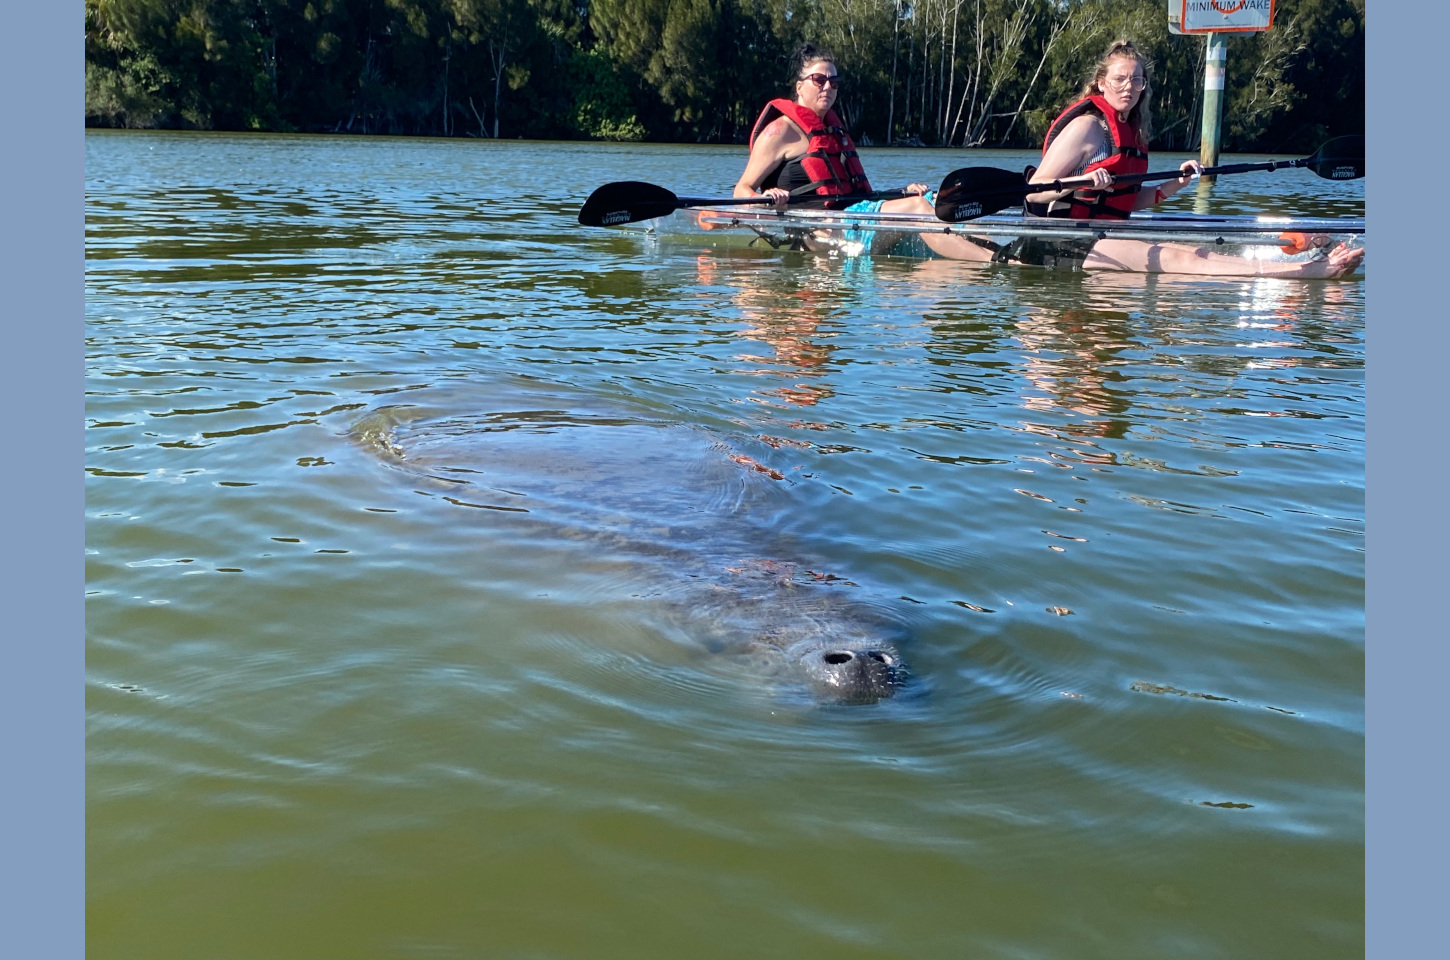 Kayakers on the Indian River with a manatee